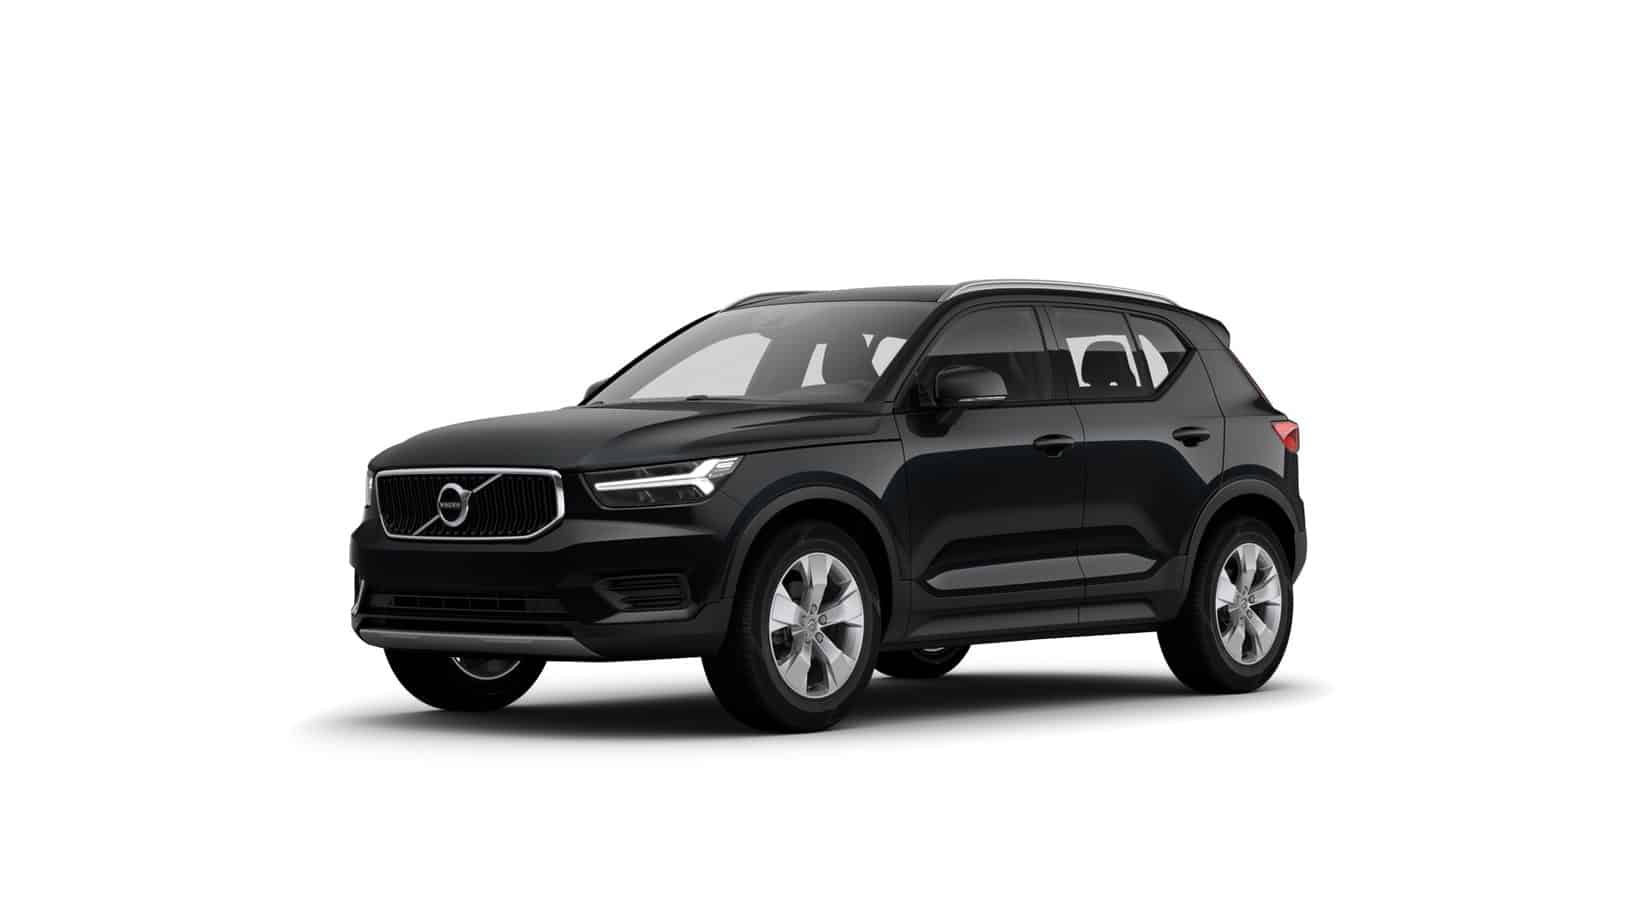 2021 Volvo XC40 Recharge PHEV review | CarTell.tv